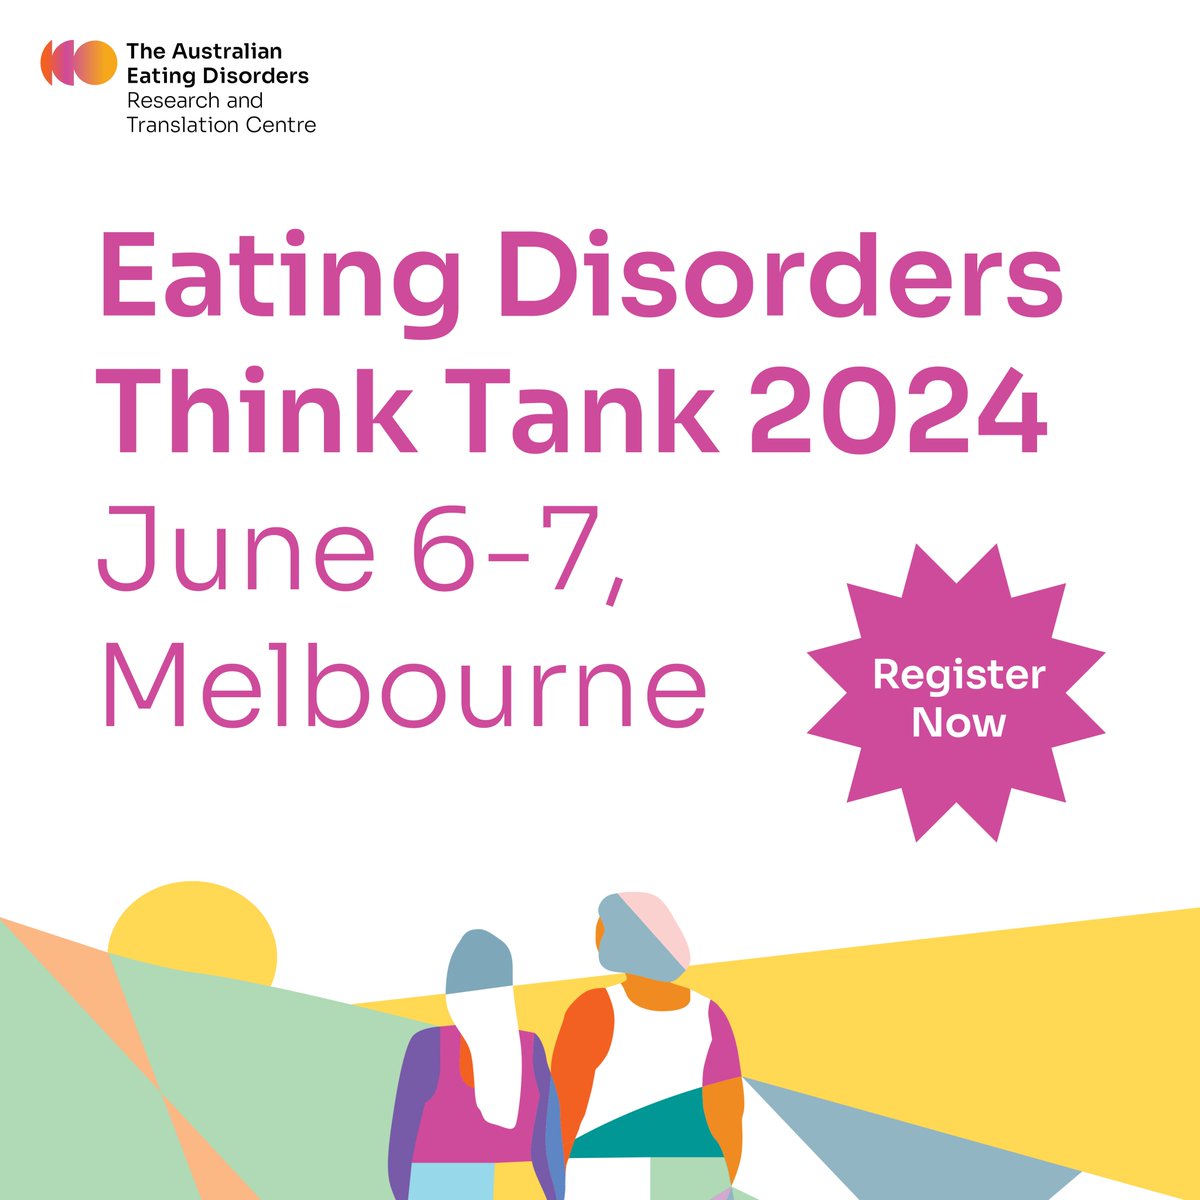 Attention #clinicians & #researchers! @aedrtc is holding a #ThinkTank2024 event on June 6-7 in Melbourne. This event aims to highlight cutting edge science, challenge conventional thinking & provide education on novel methodologies in eating disorders.⬇️ eatingdisordersresearch.org.au/events/2024-03…